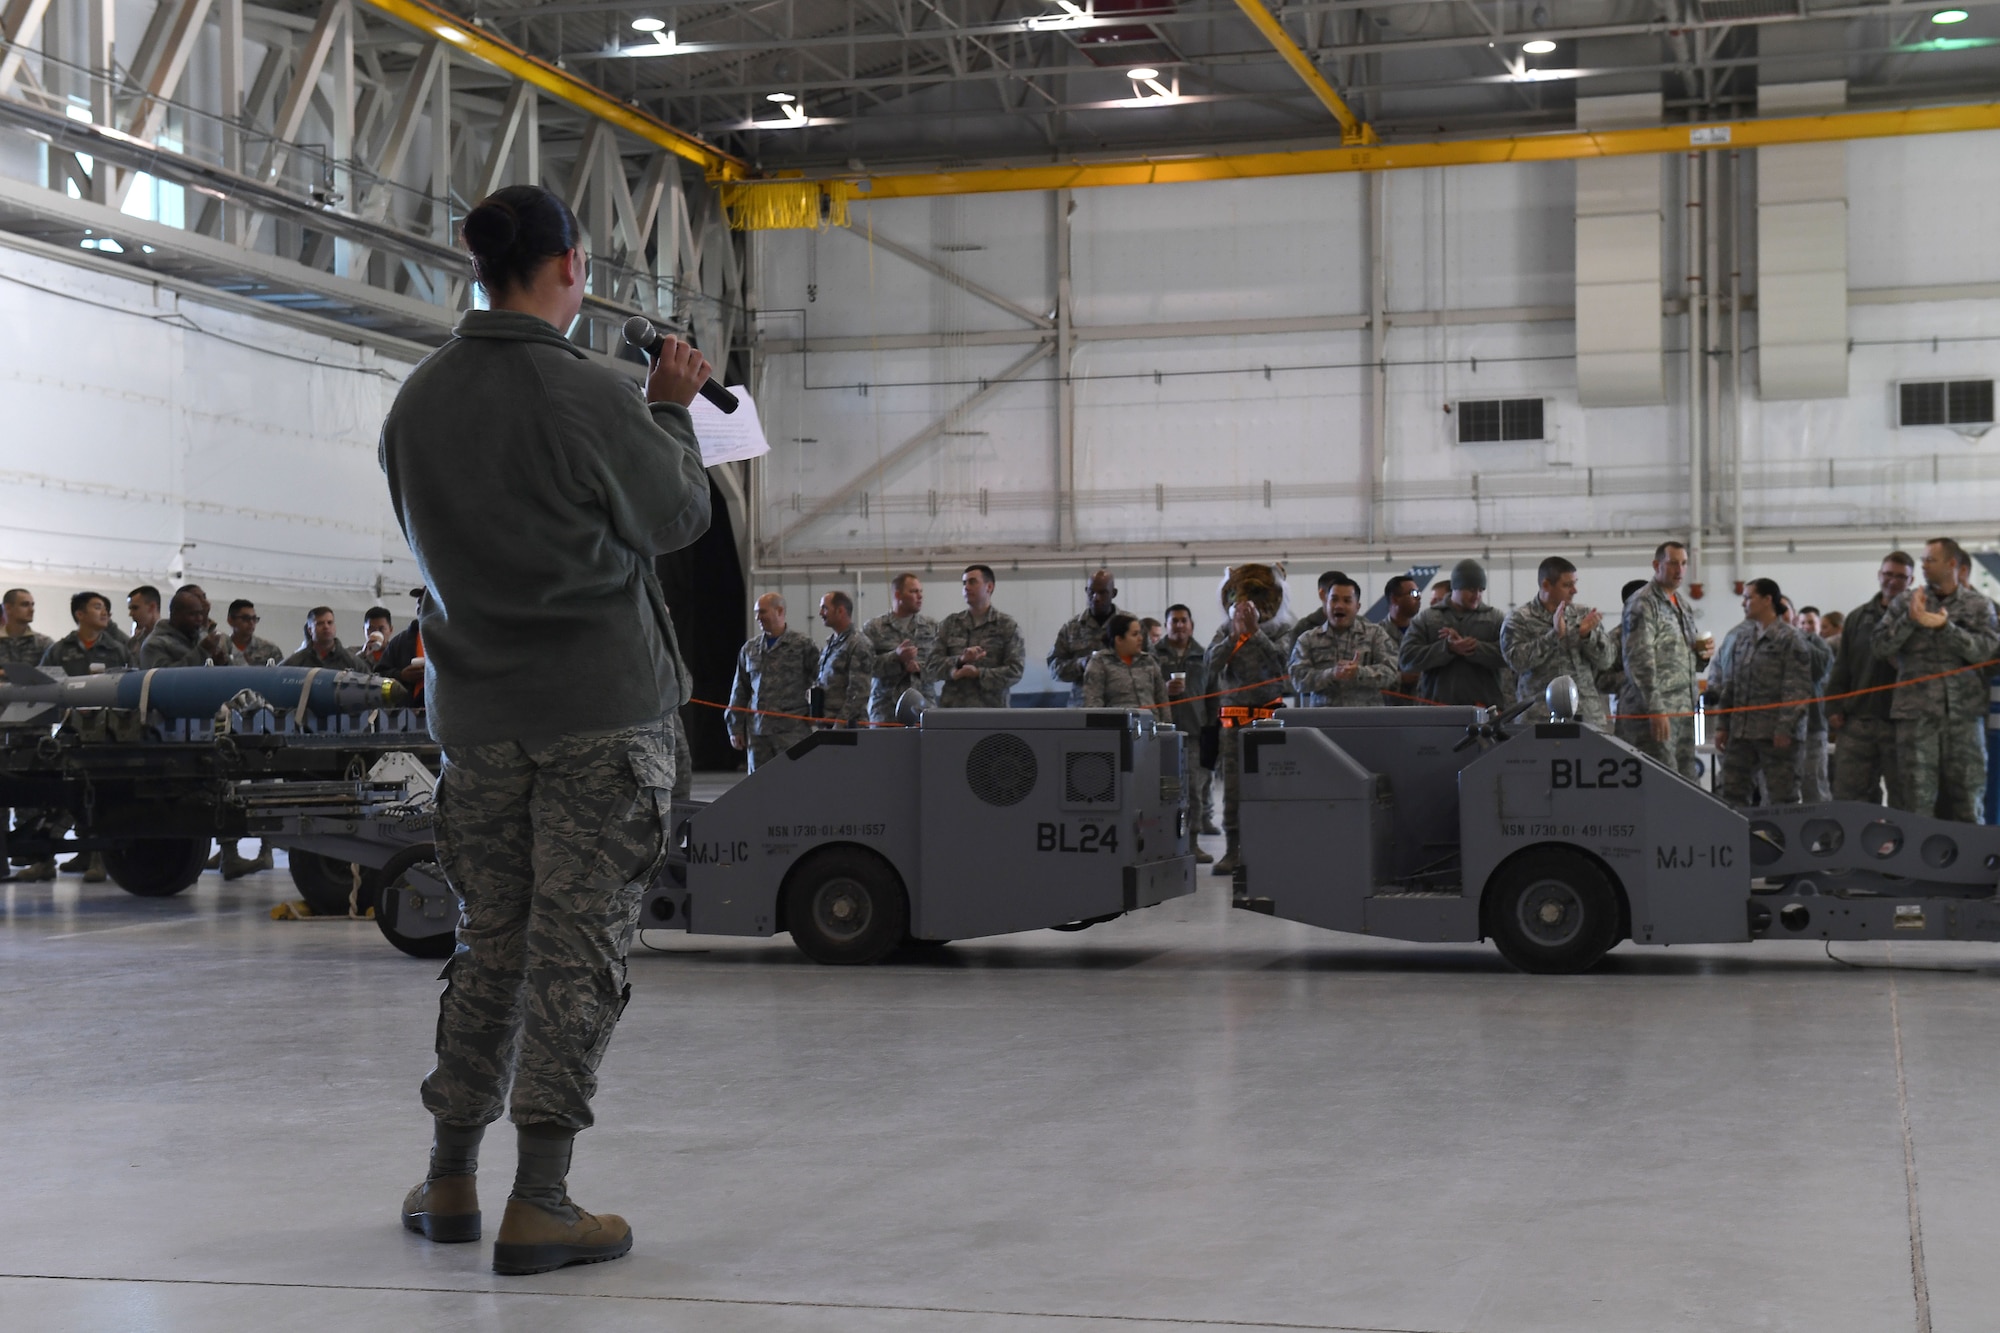 An Airman delivers opening remarks before the 432nd Aircraft Maintenance Squadron’s quarterly weapons load competition Dec. 8, 2017, at Creech Air Force Base, Nev. Creech has held these competitions for its remotely piloted aircraft load crews since 2009 to help boost unit morale and highlight the team’s capabilities. (U.S. Air Force photo by Senior Airman James Thompson)